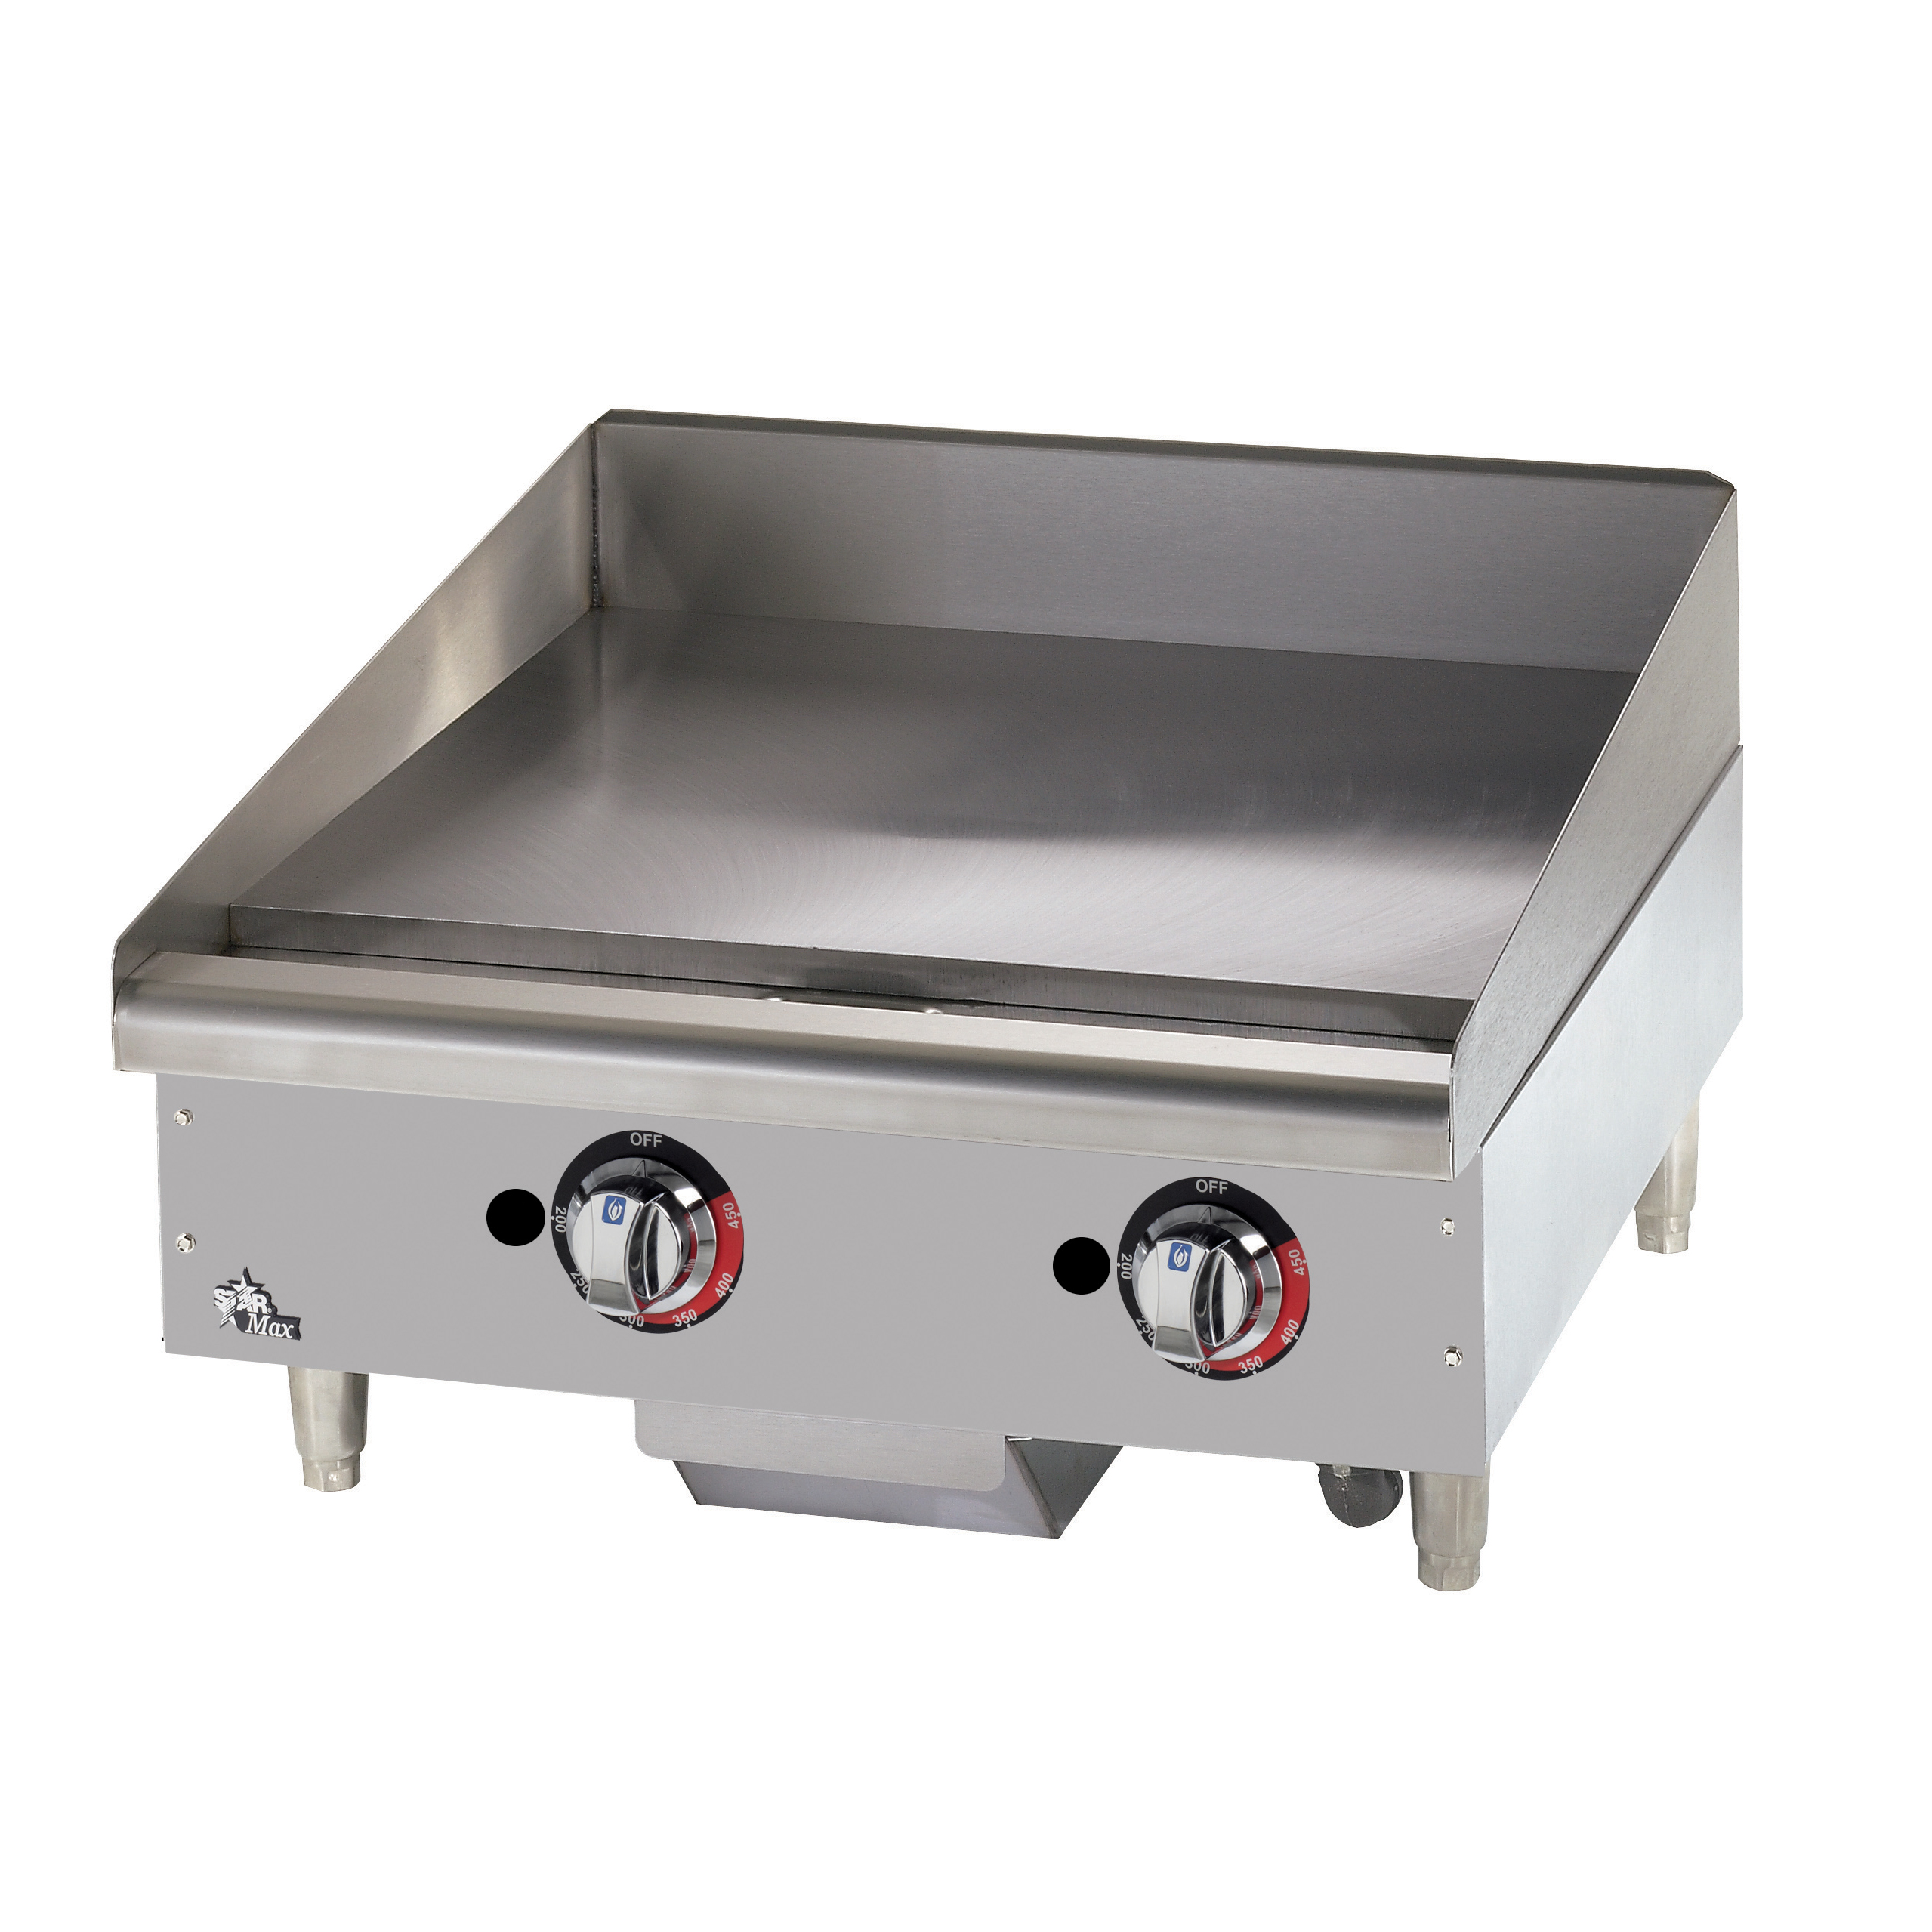 Star 624TSPF 24″ Countertop Gas Griddle